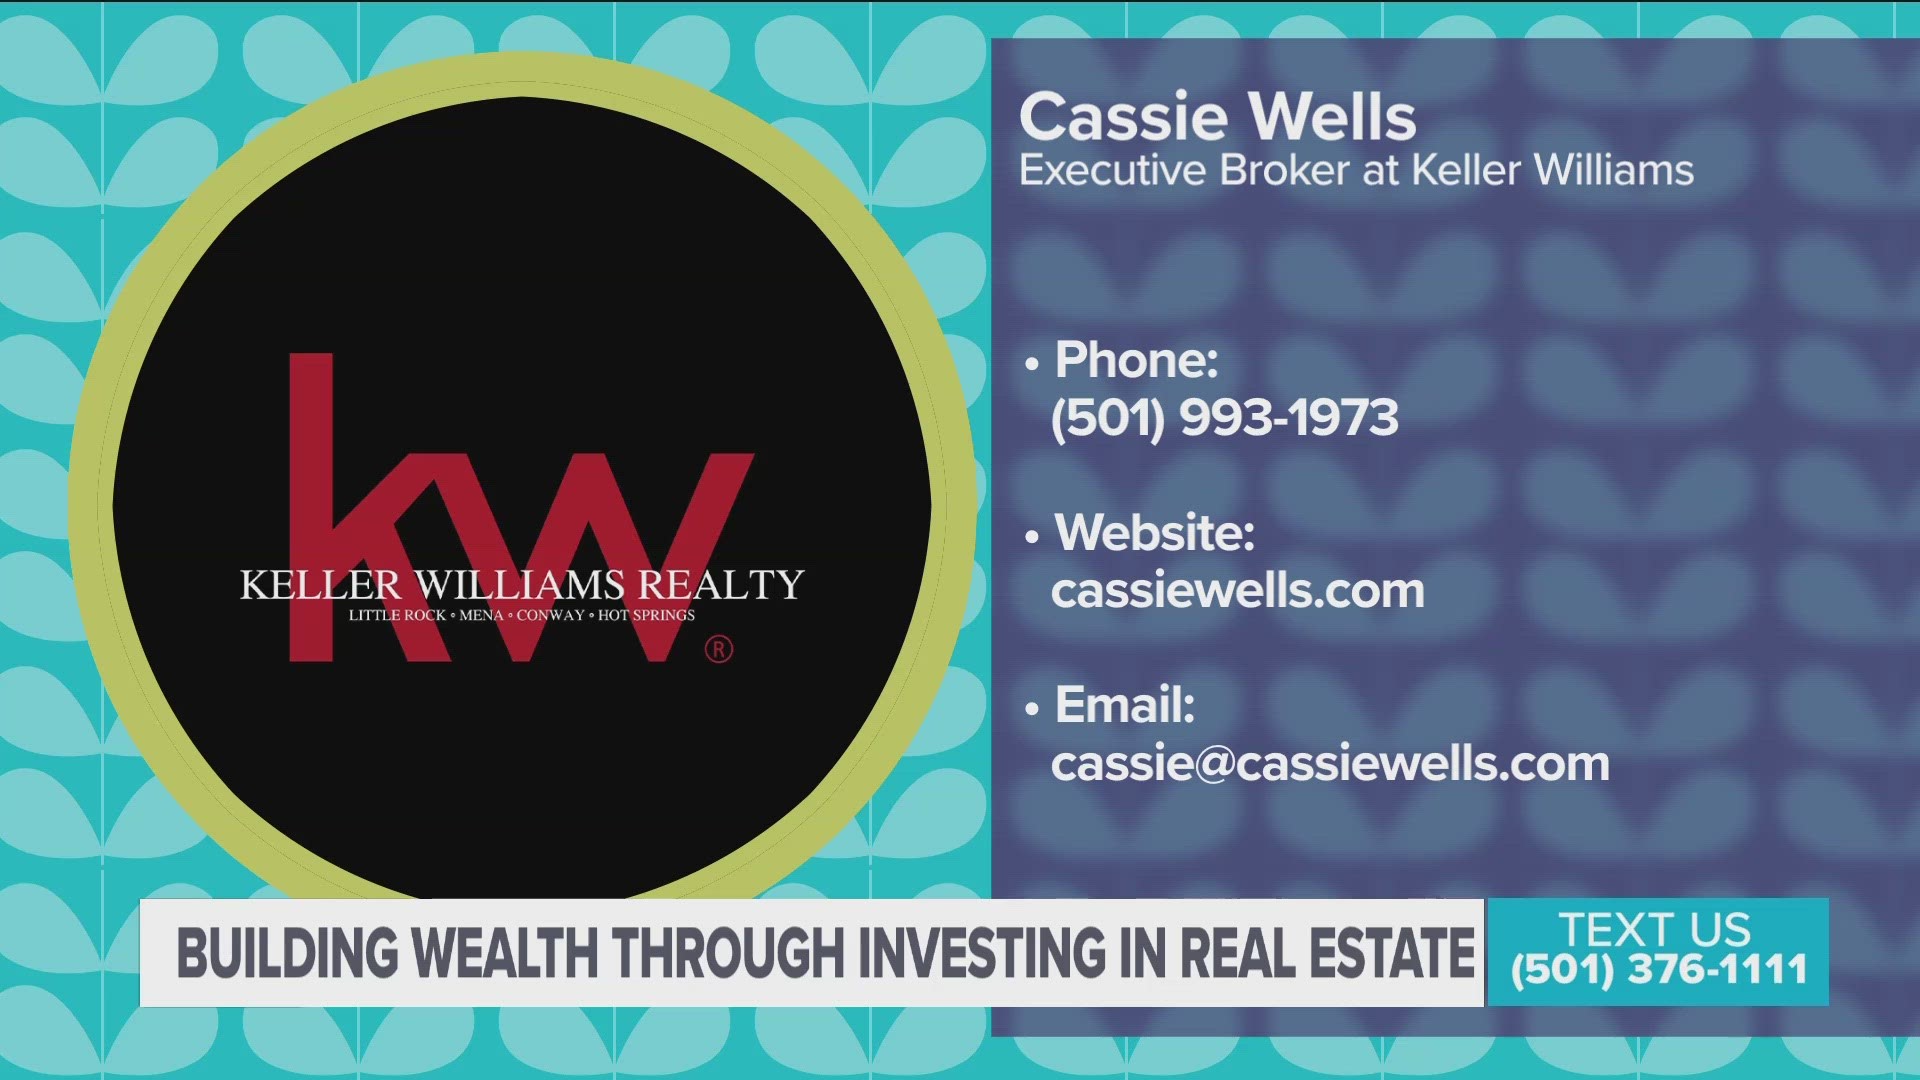 Cassie Wells from Keller Williams Realty, tells us about building wealth.